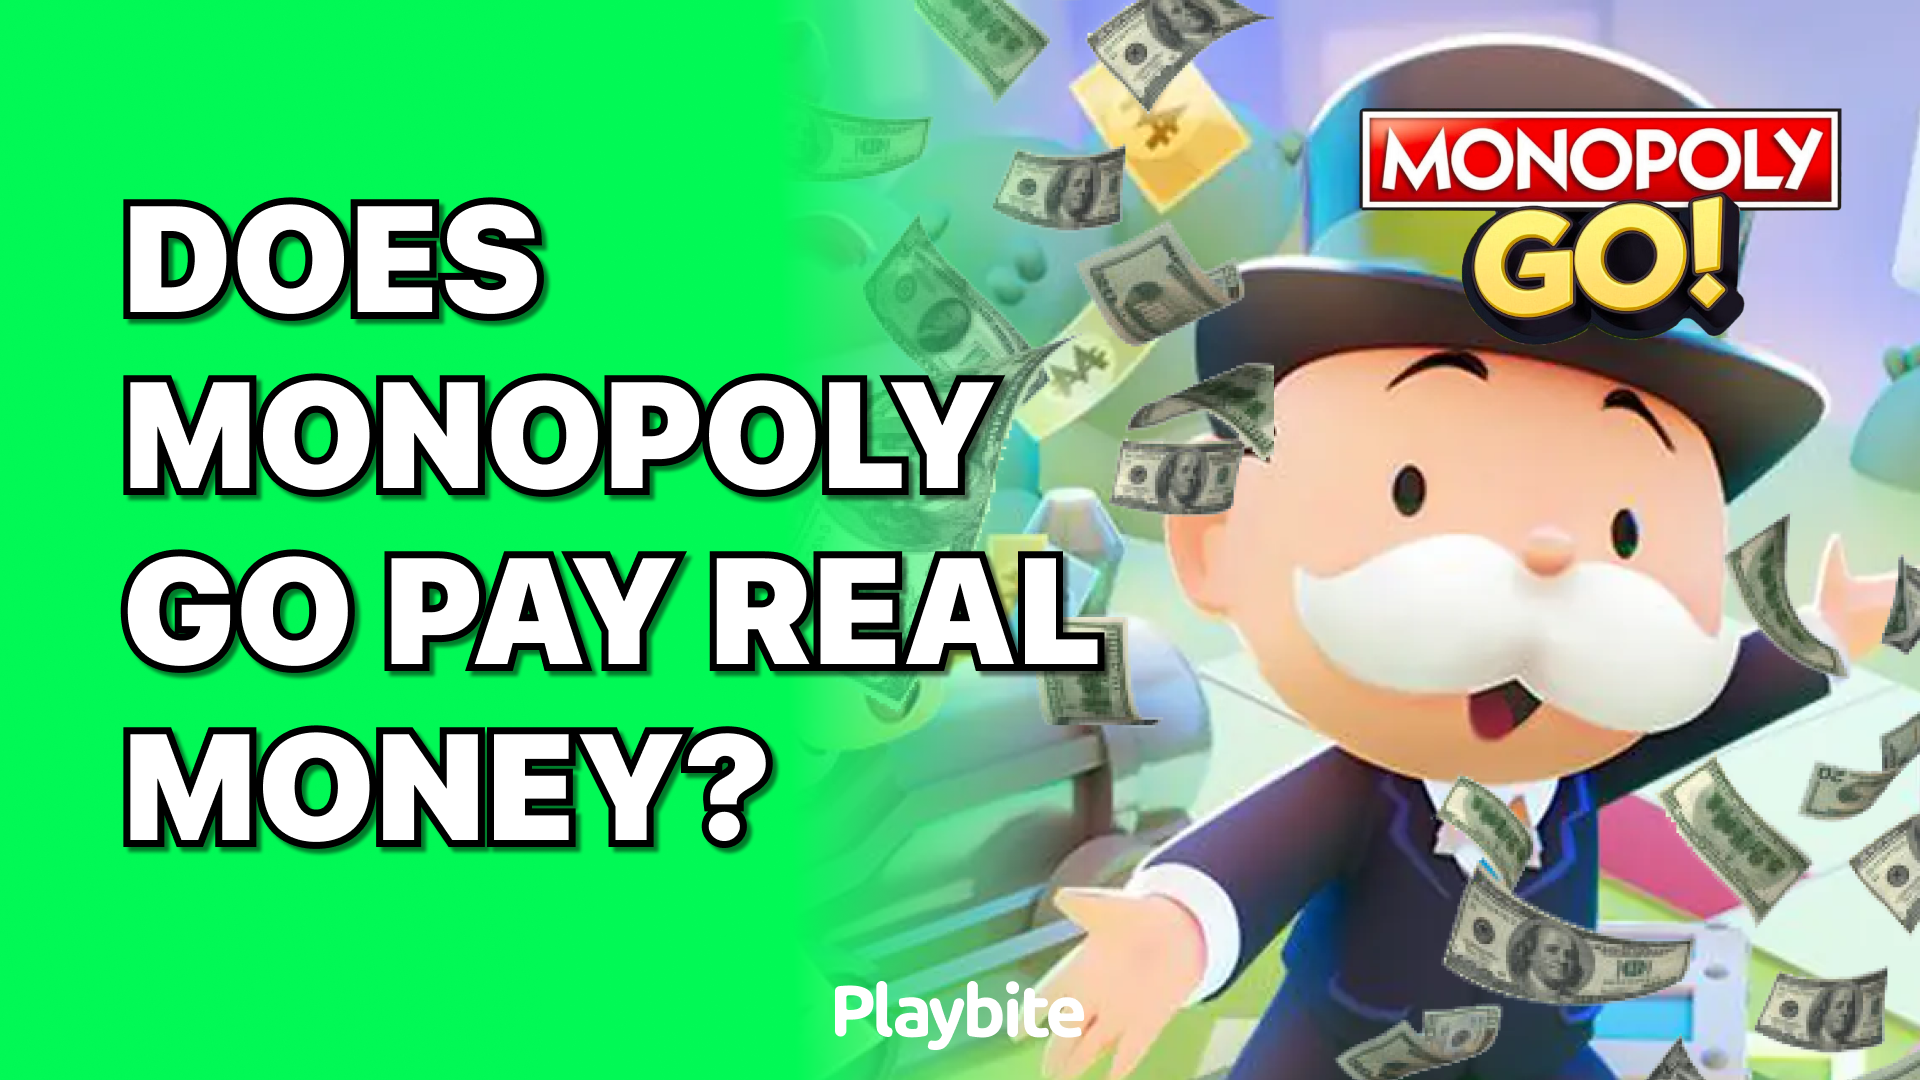 Does Monopoly Go Pay Real Money?